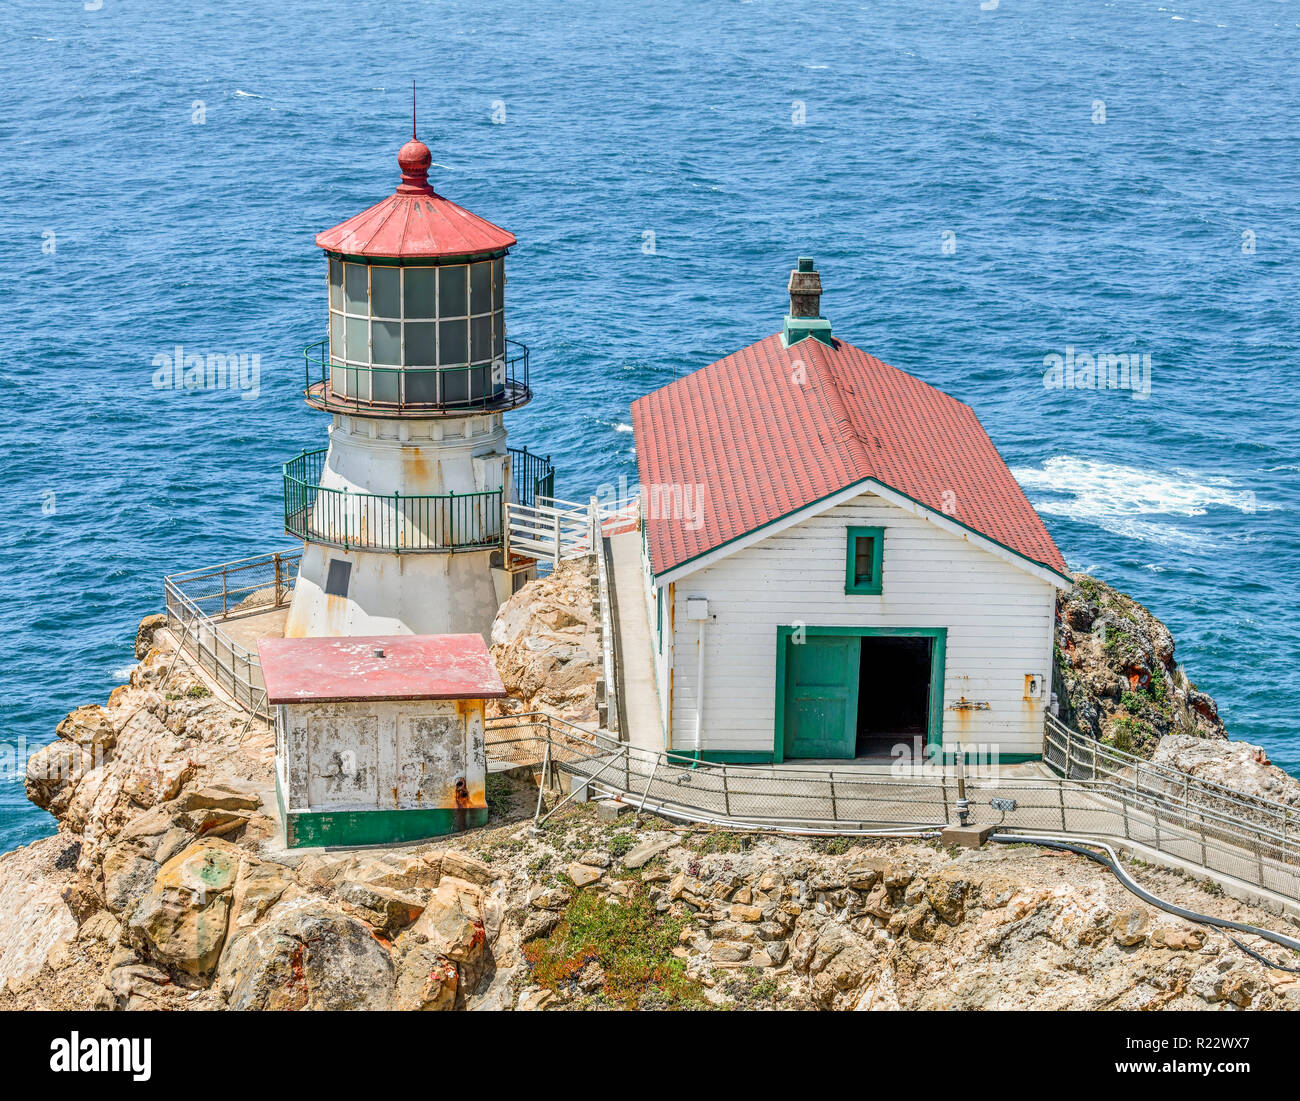 Built in 1870, the point Reyes Lighthouse is on a rocky cliff over the Gulf of Farallones in Point Reyes National Seashore, located in Marin County, C Stock Photo